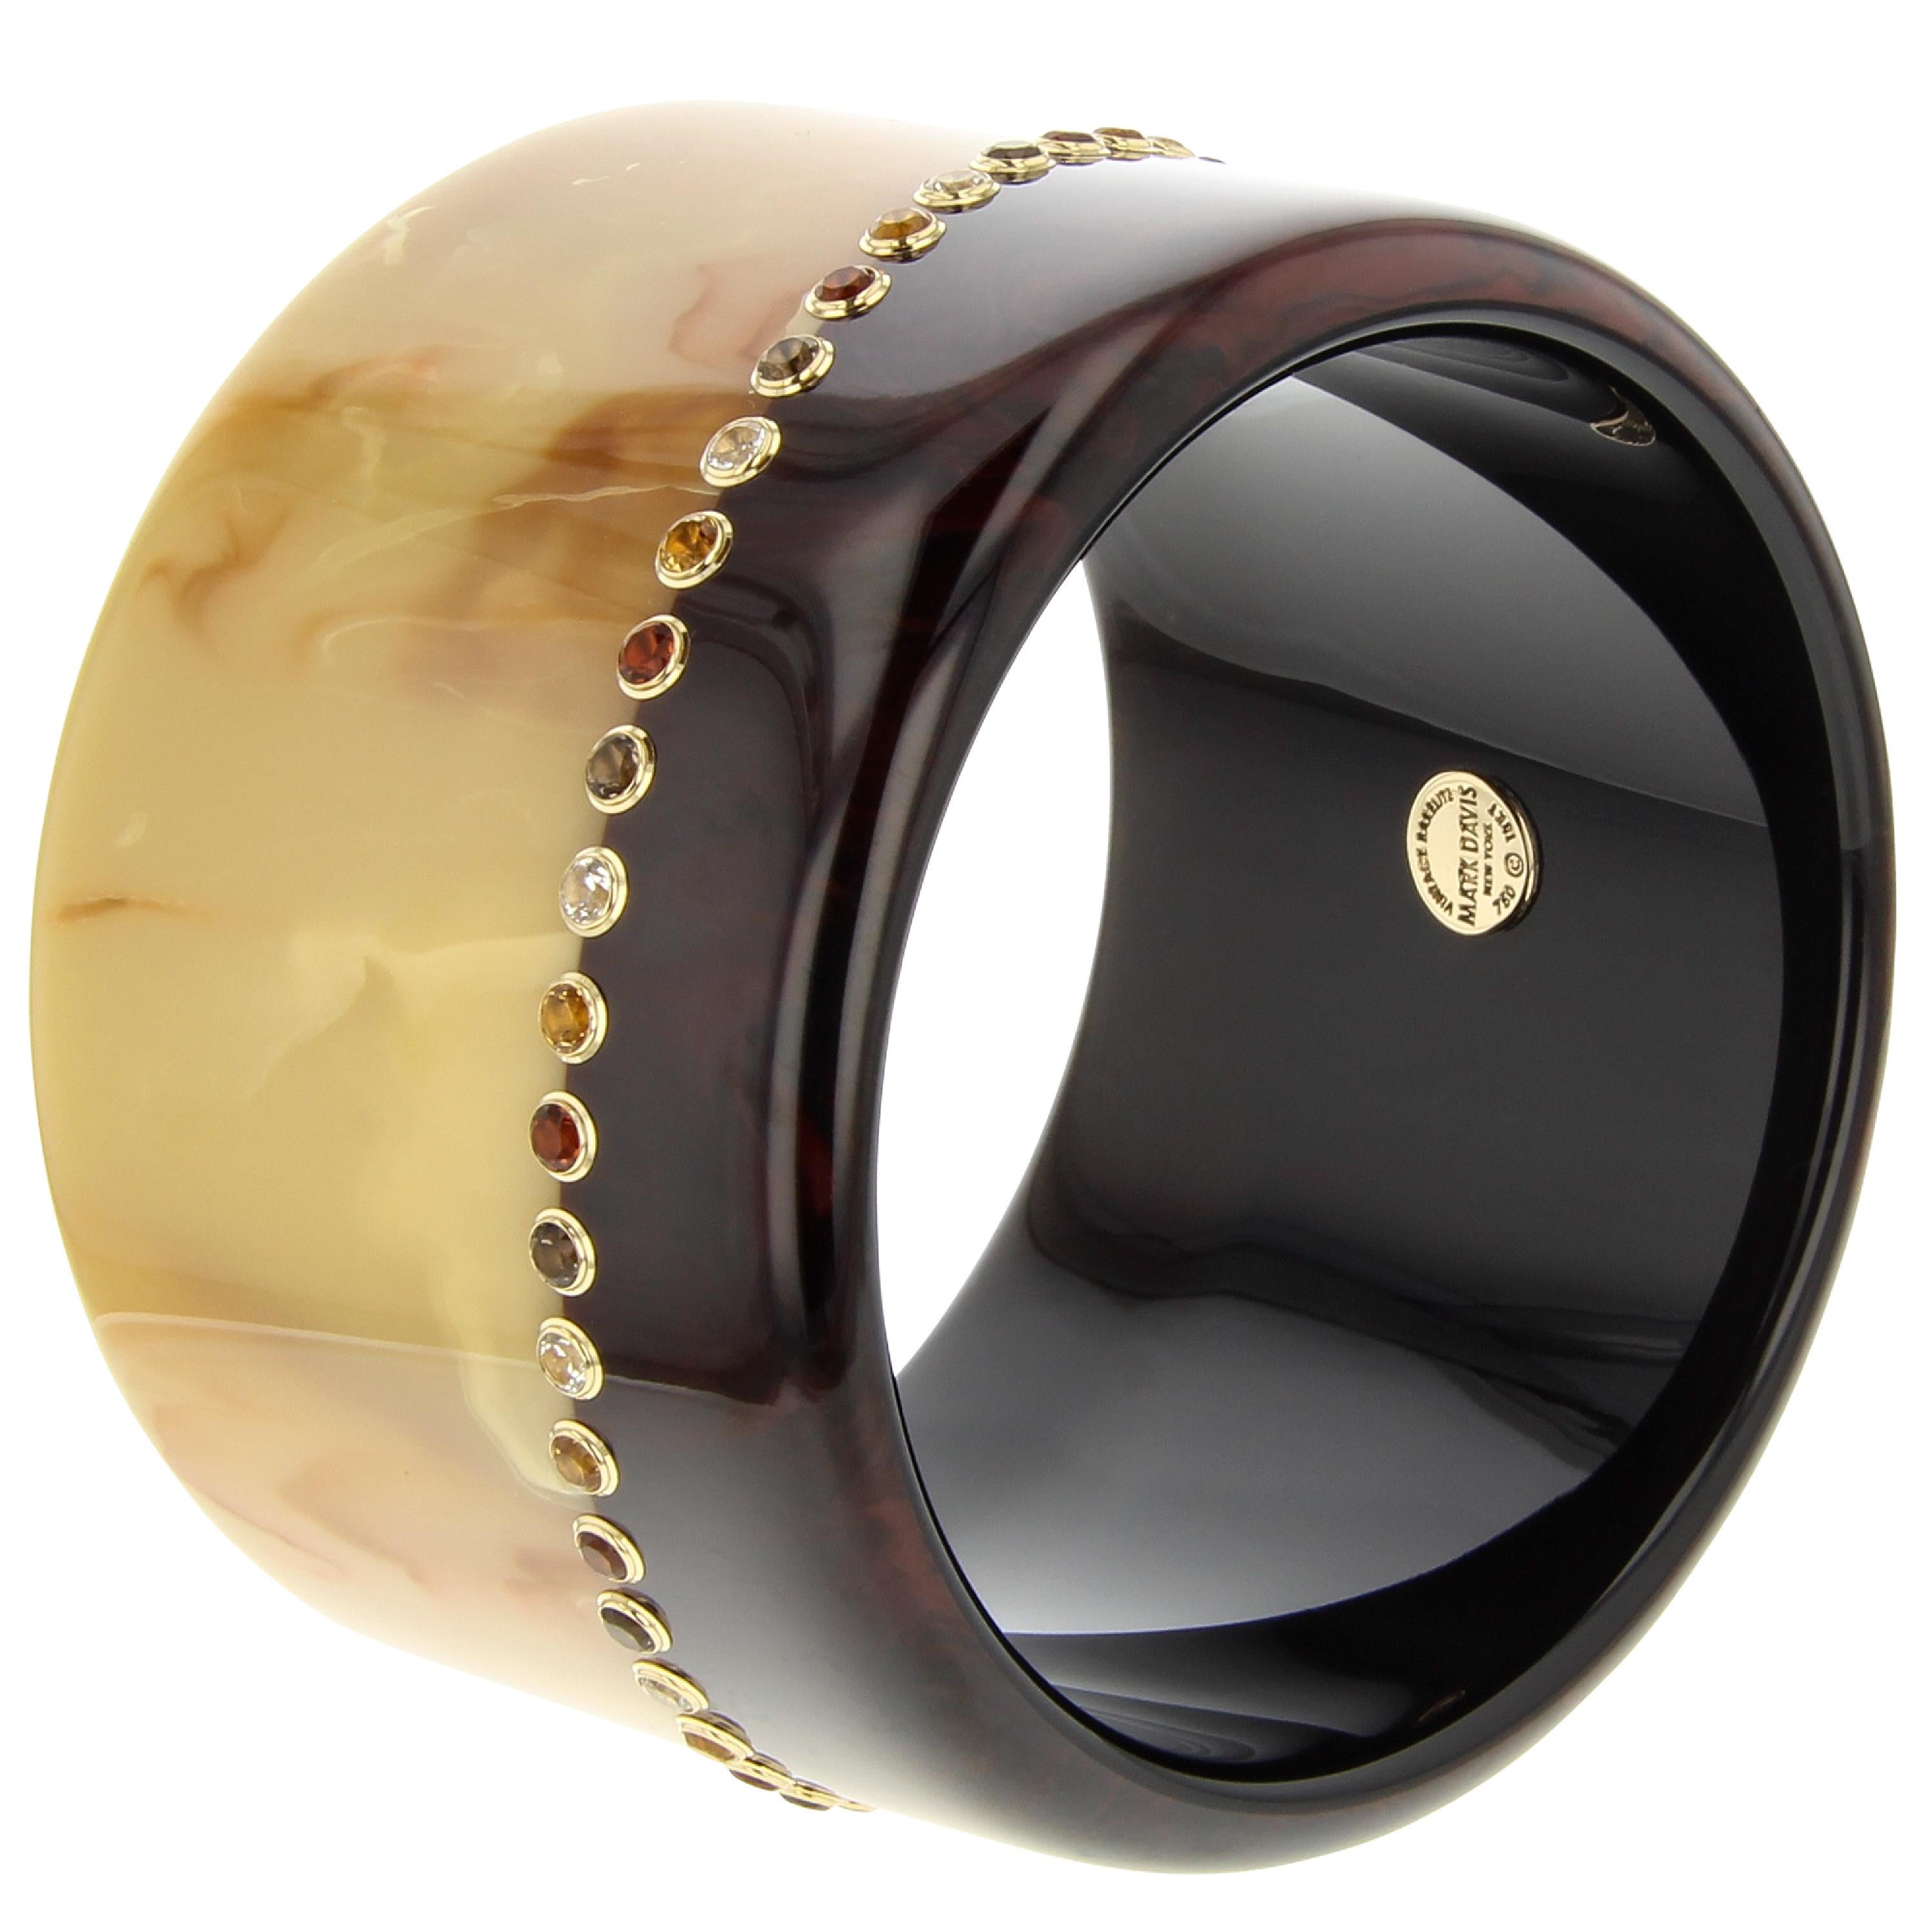 This graphic Mark Davis bangle was made with two pieces of vintage brown bakelite - one dark and one light. The two pieces have been seamlessly joined together creating an asymmetrical line that encircles the bangle. A repeating pattern of citrine,